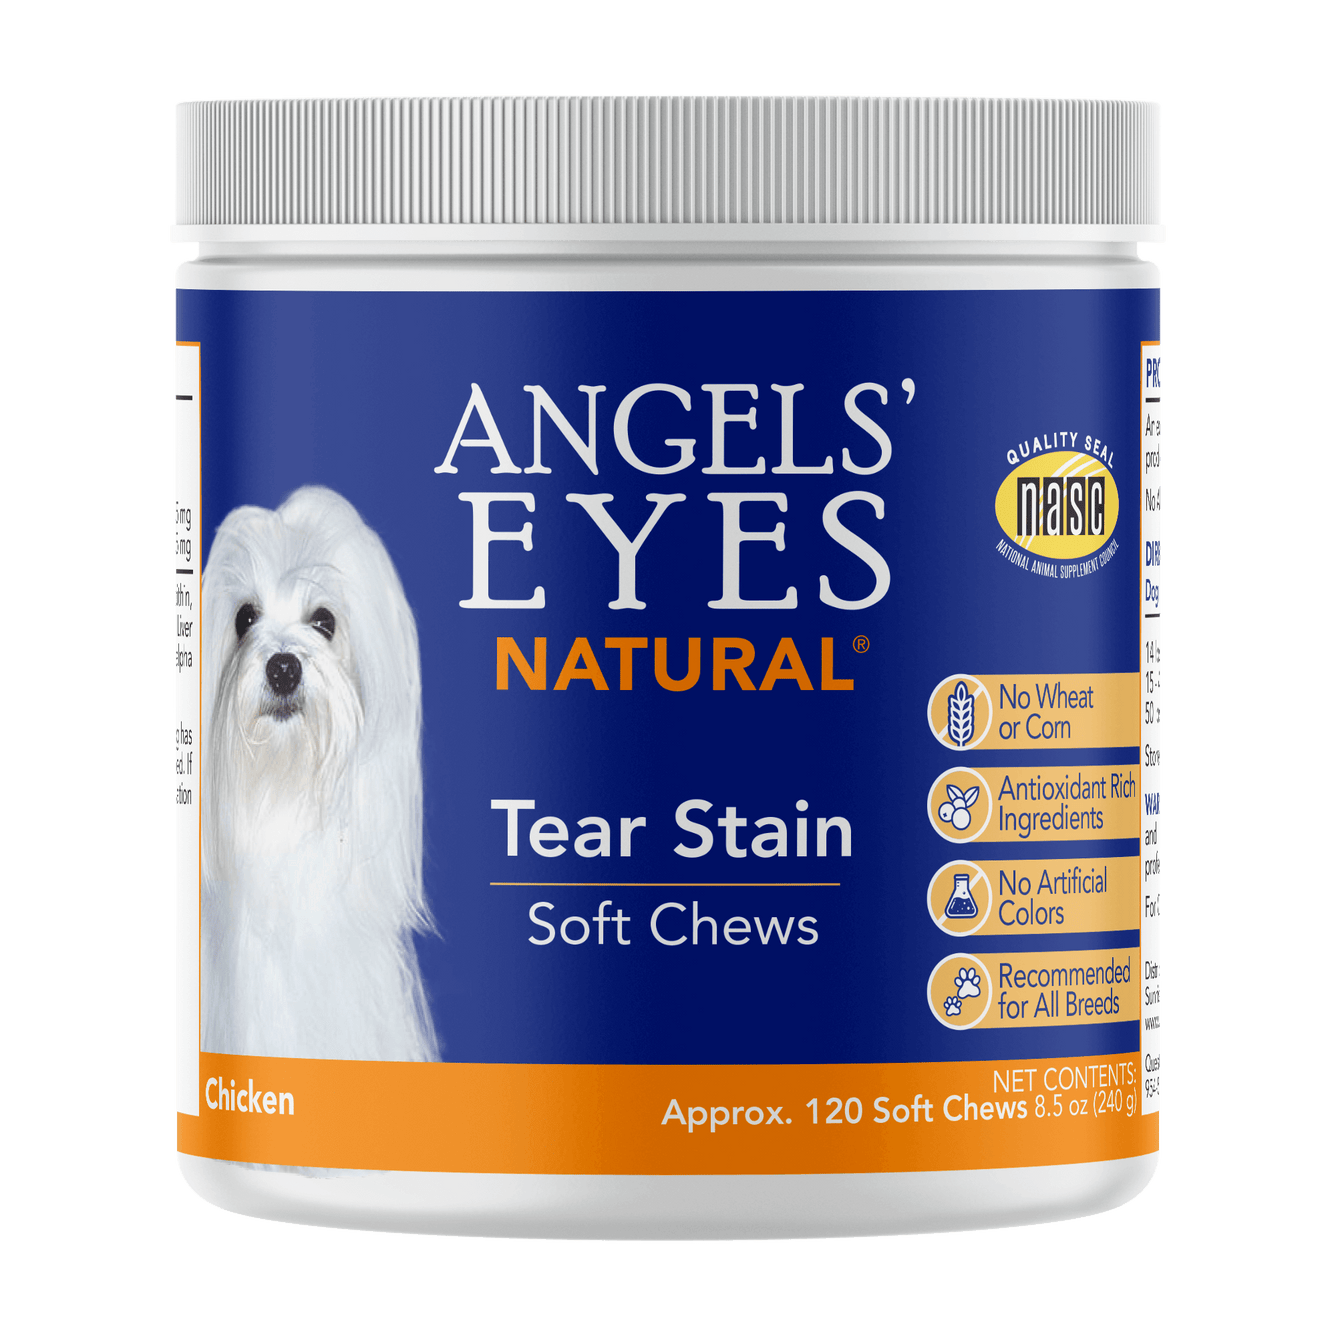 Angels’ Eyes NATURAL Tear Stain Chew for Dogs, Chicken Flavor 120ct*